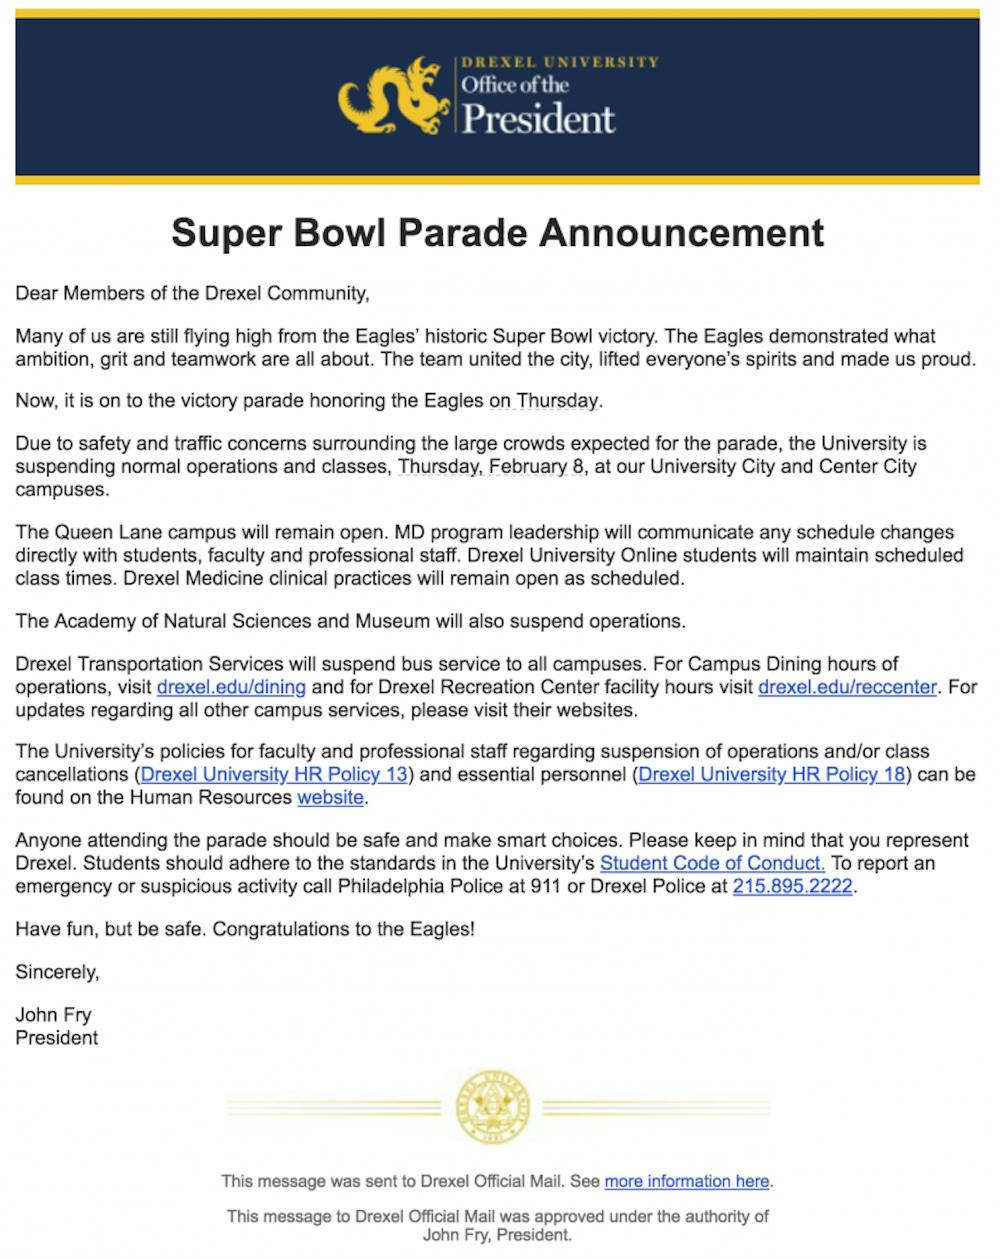 Shawnee Mission cancels classes for Super Bowl parade